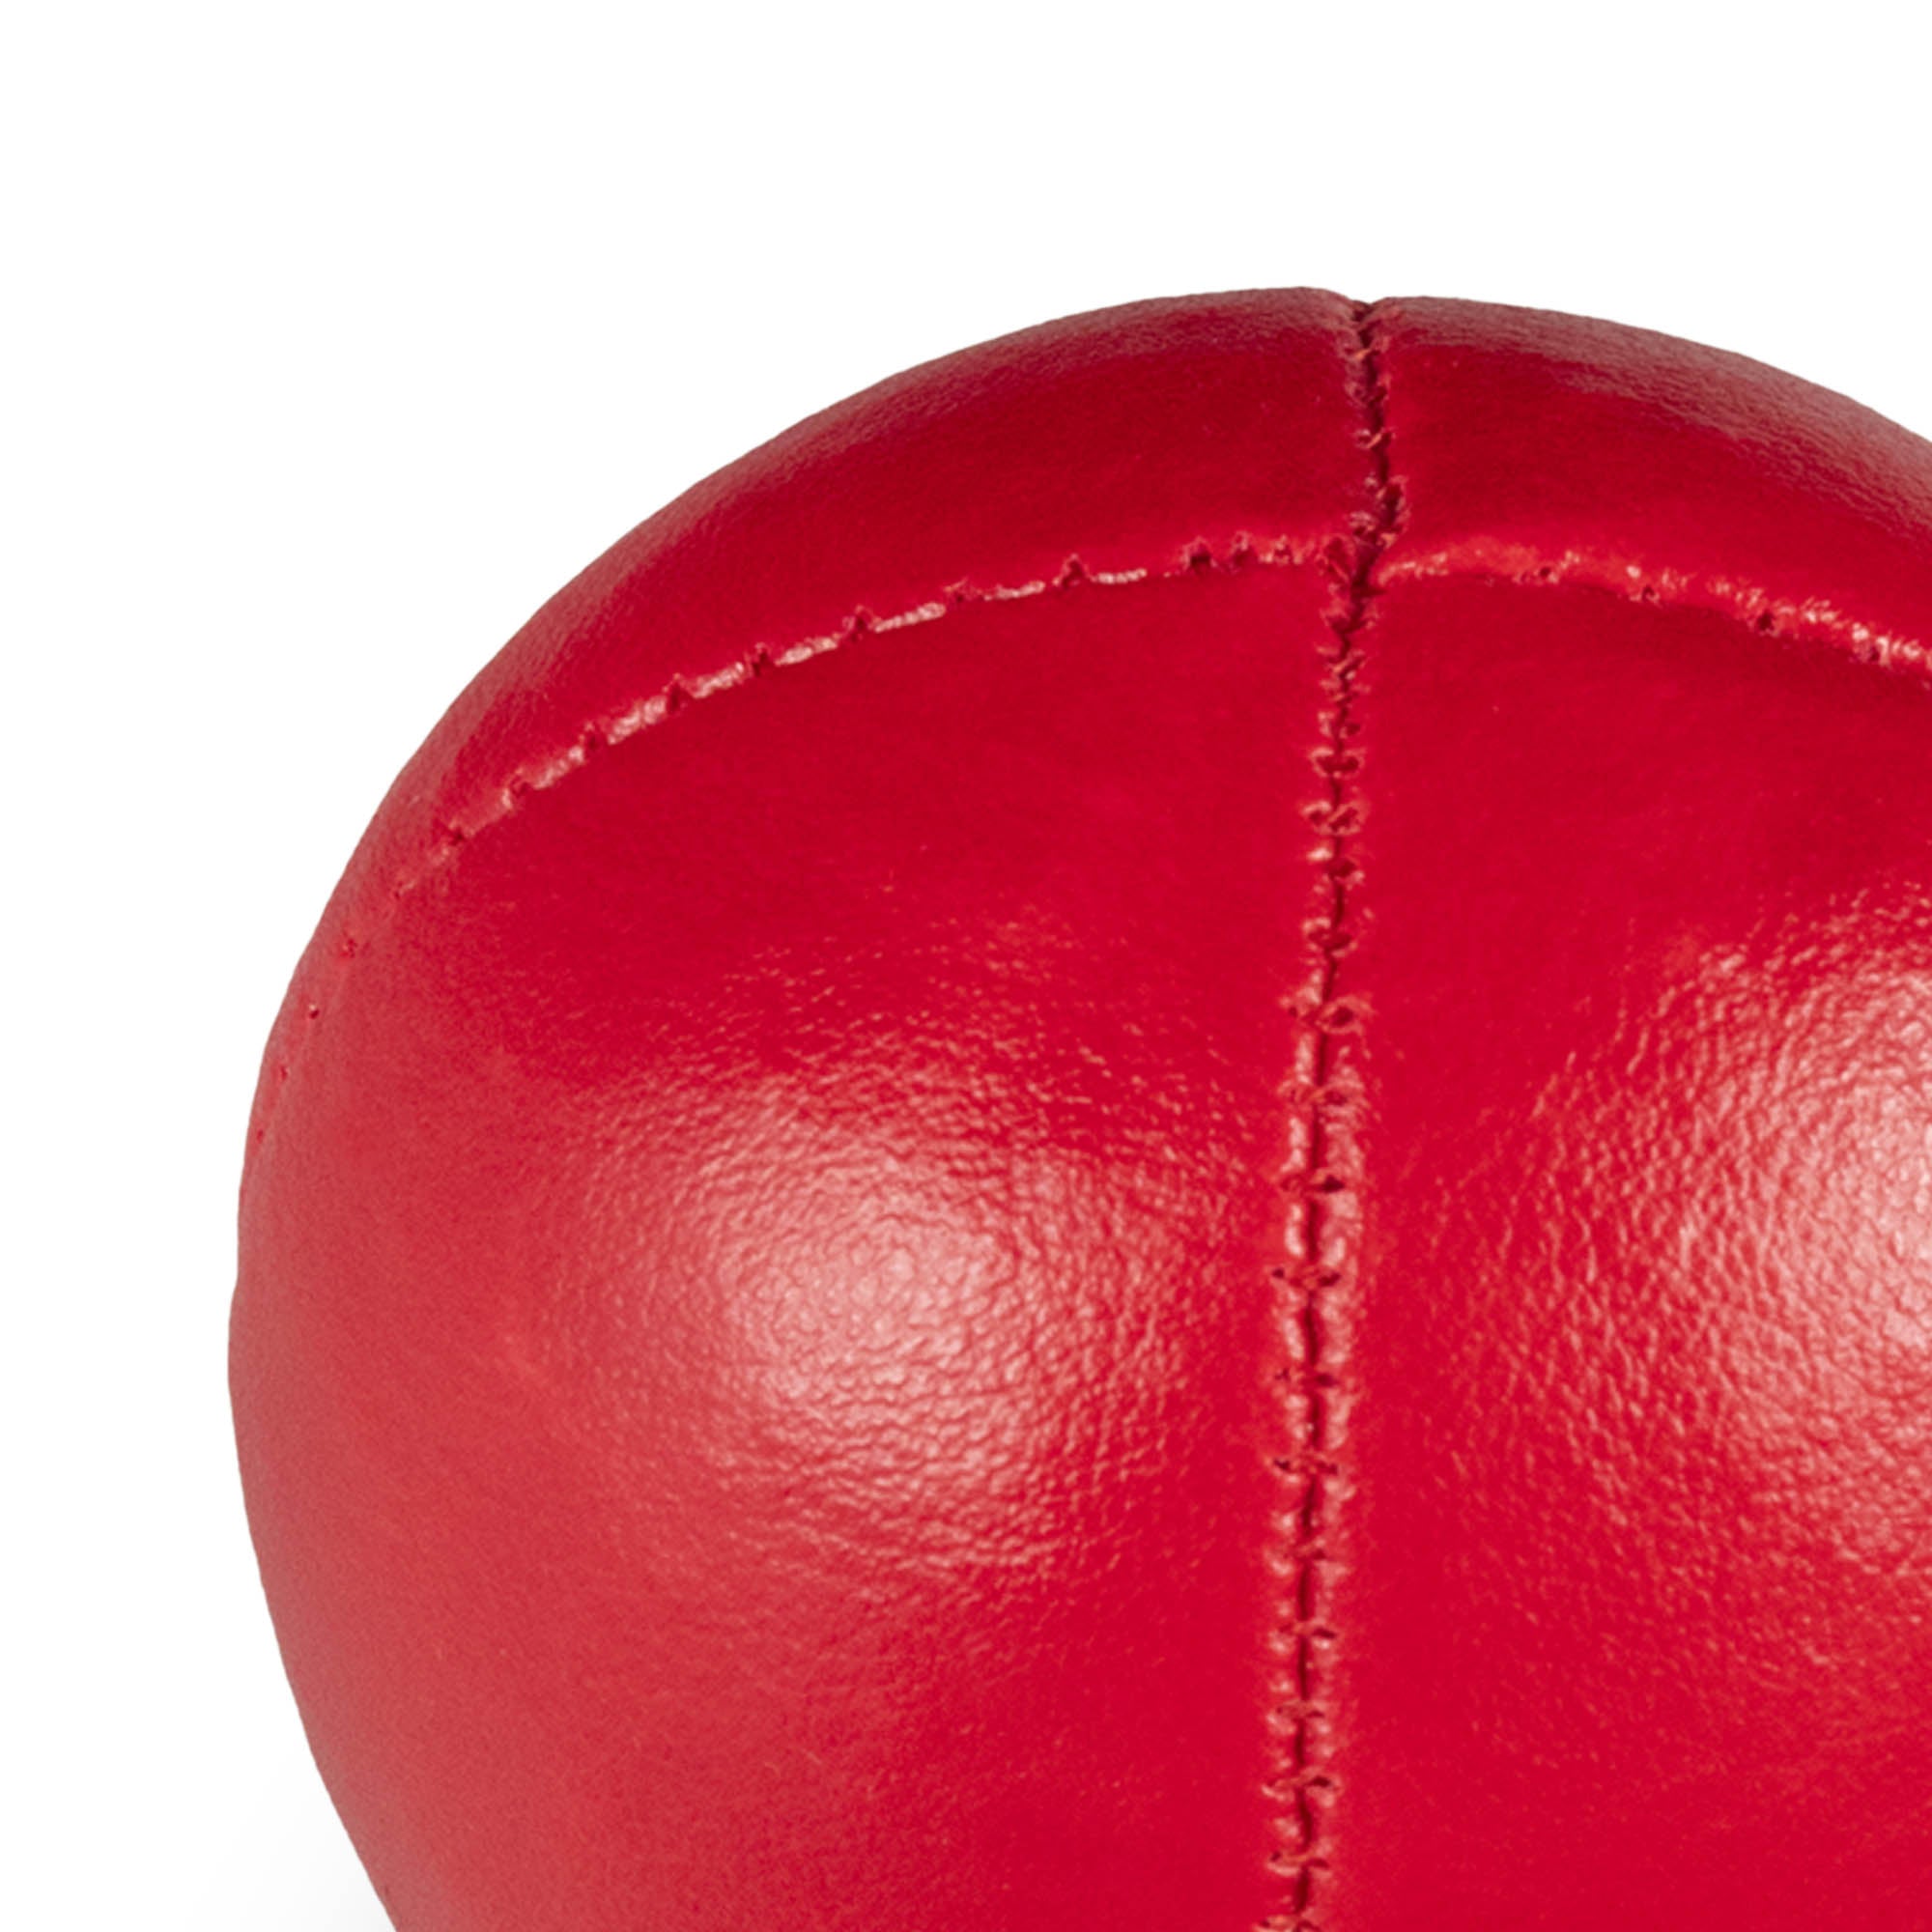 red ball close up